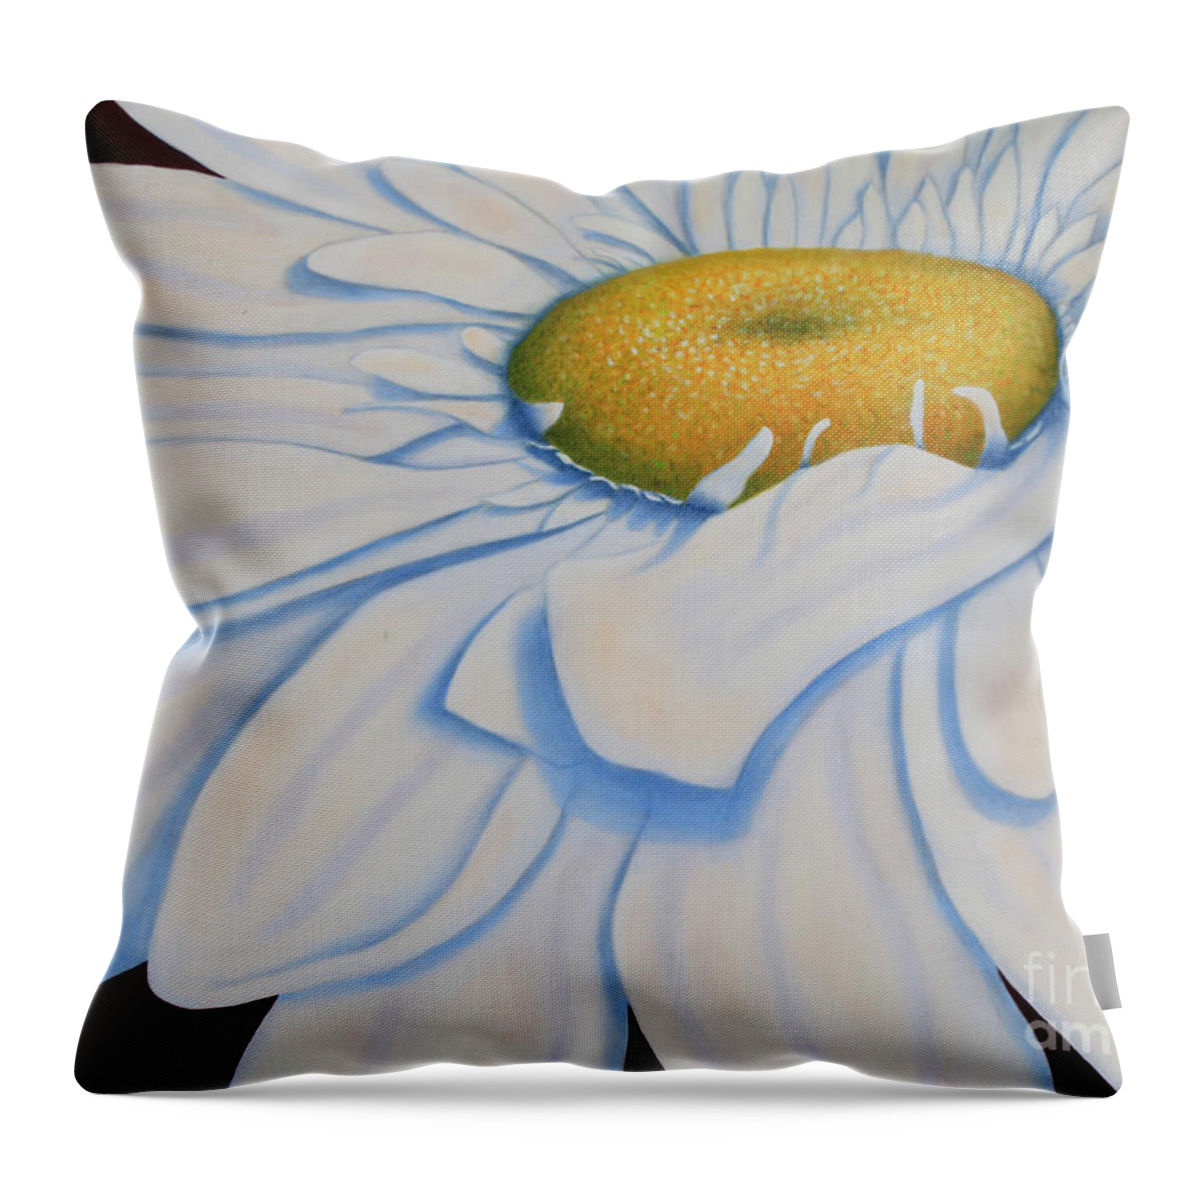 Roena King Throw Pillow featuring the painting Oil Painting - Daisy by Roena King